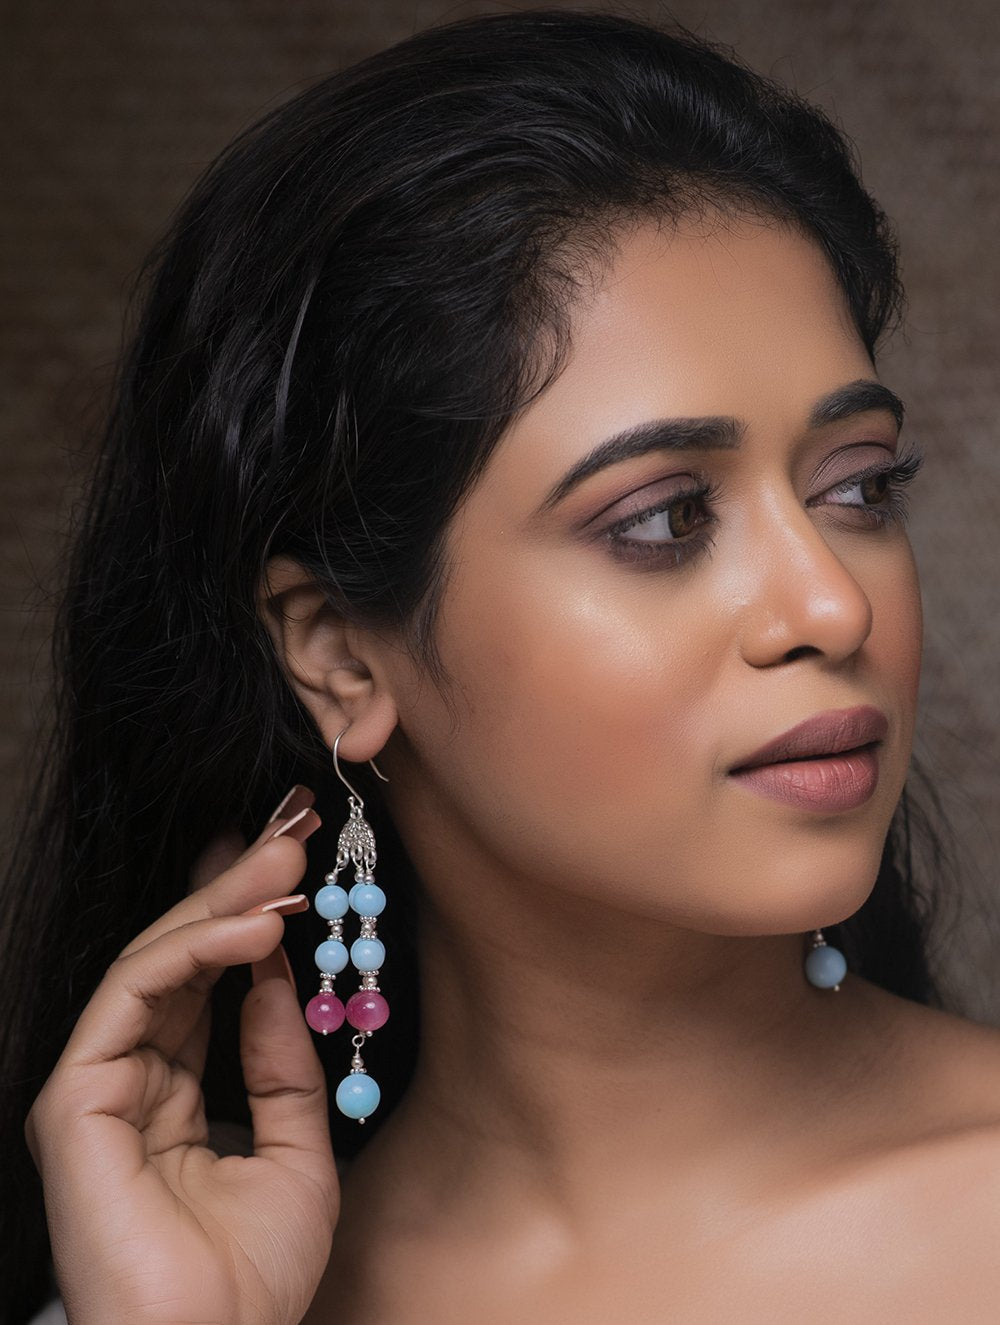 Load image into Gallery viewer, Pure Silver Earrings With Semi Precious Stones - Royal Splendour